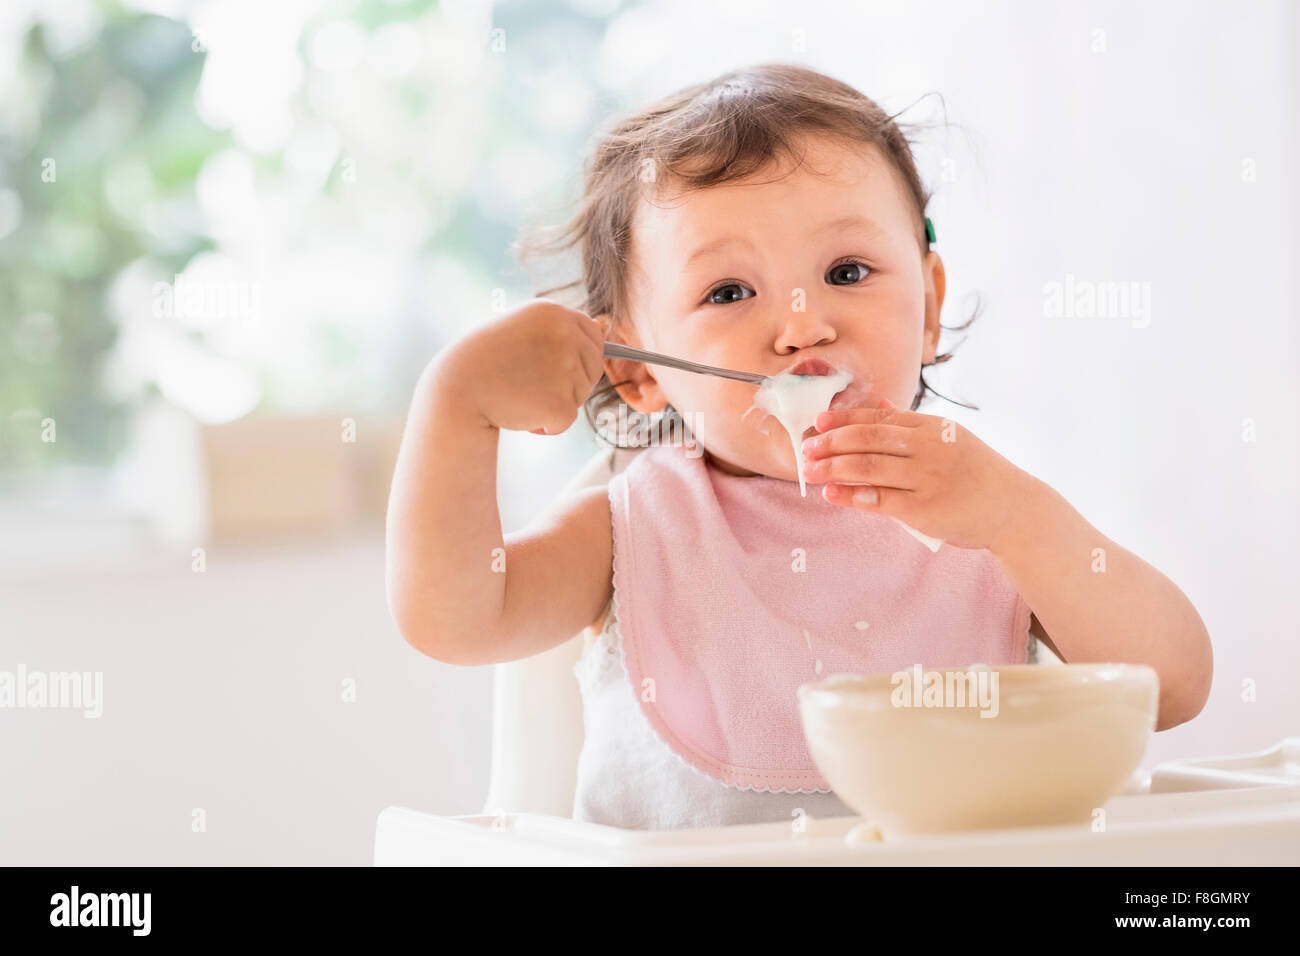 Mixed Race baby girl eating yoghurt Banque D'Images